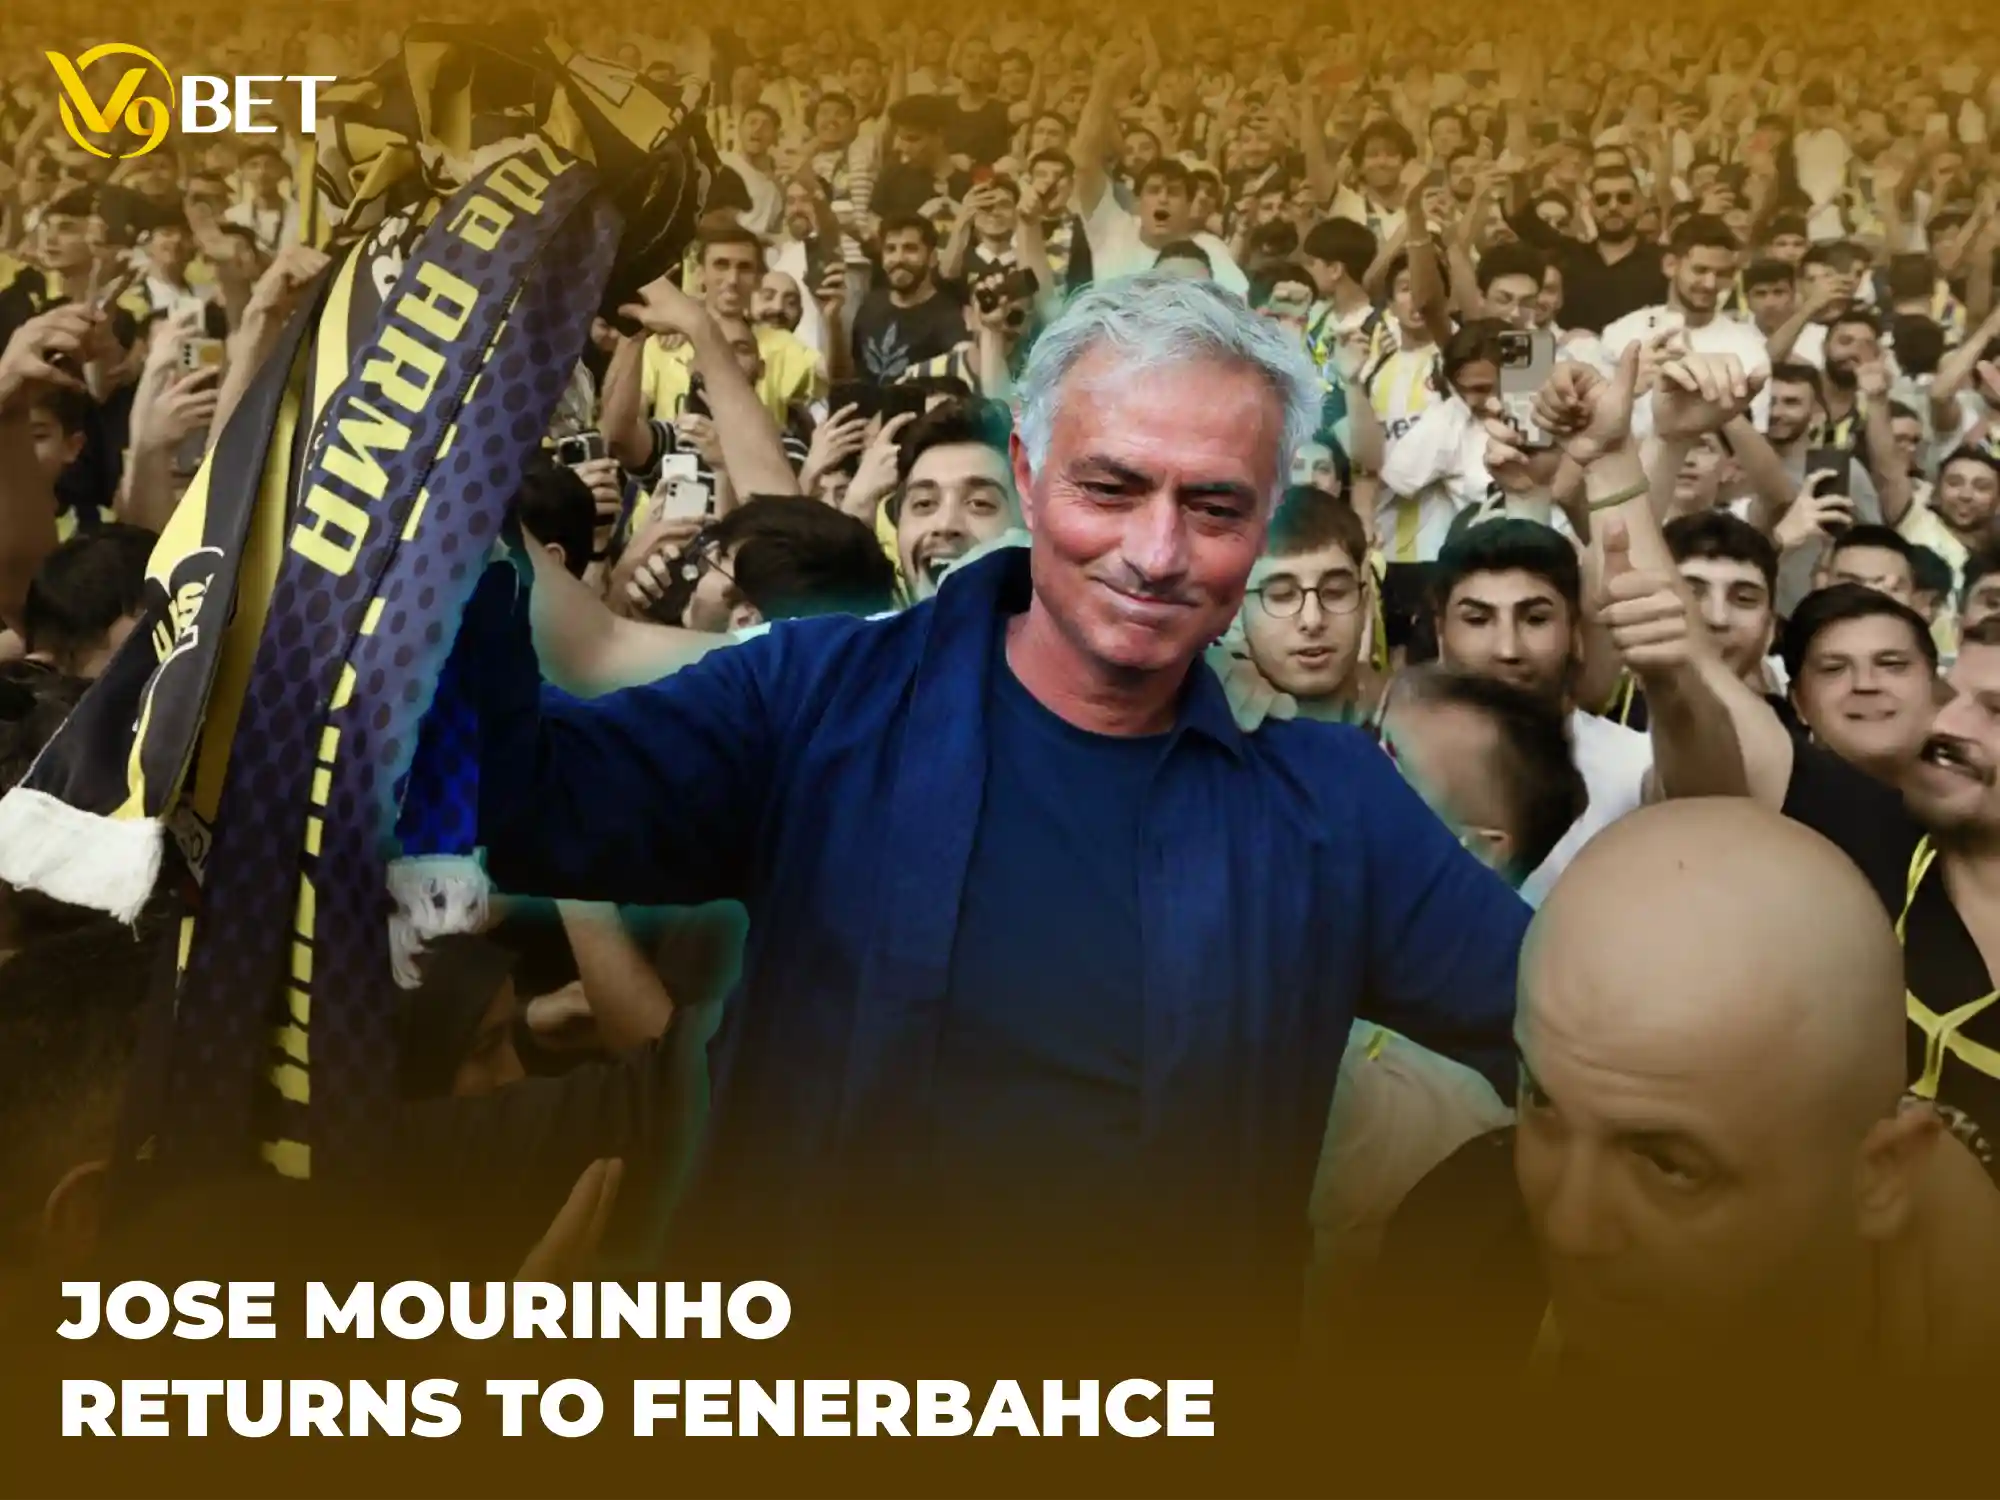 Talented coach Jose Mourinho - The special coach returns to manage Fenerbahce.